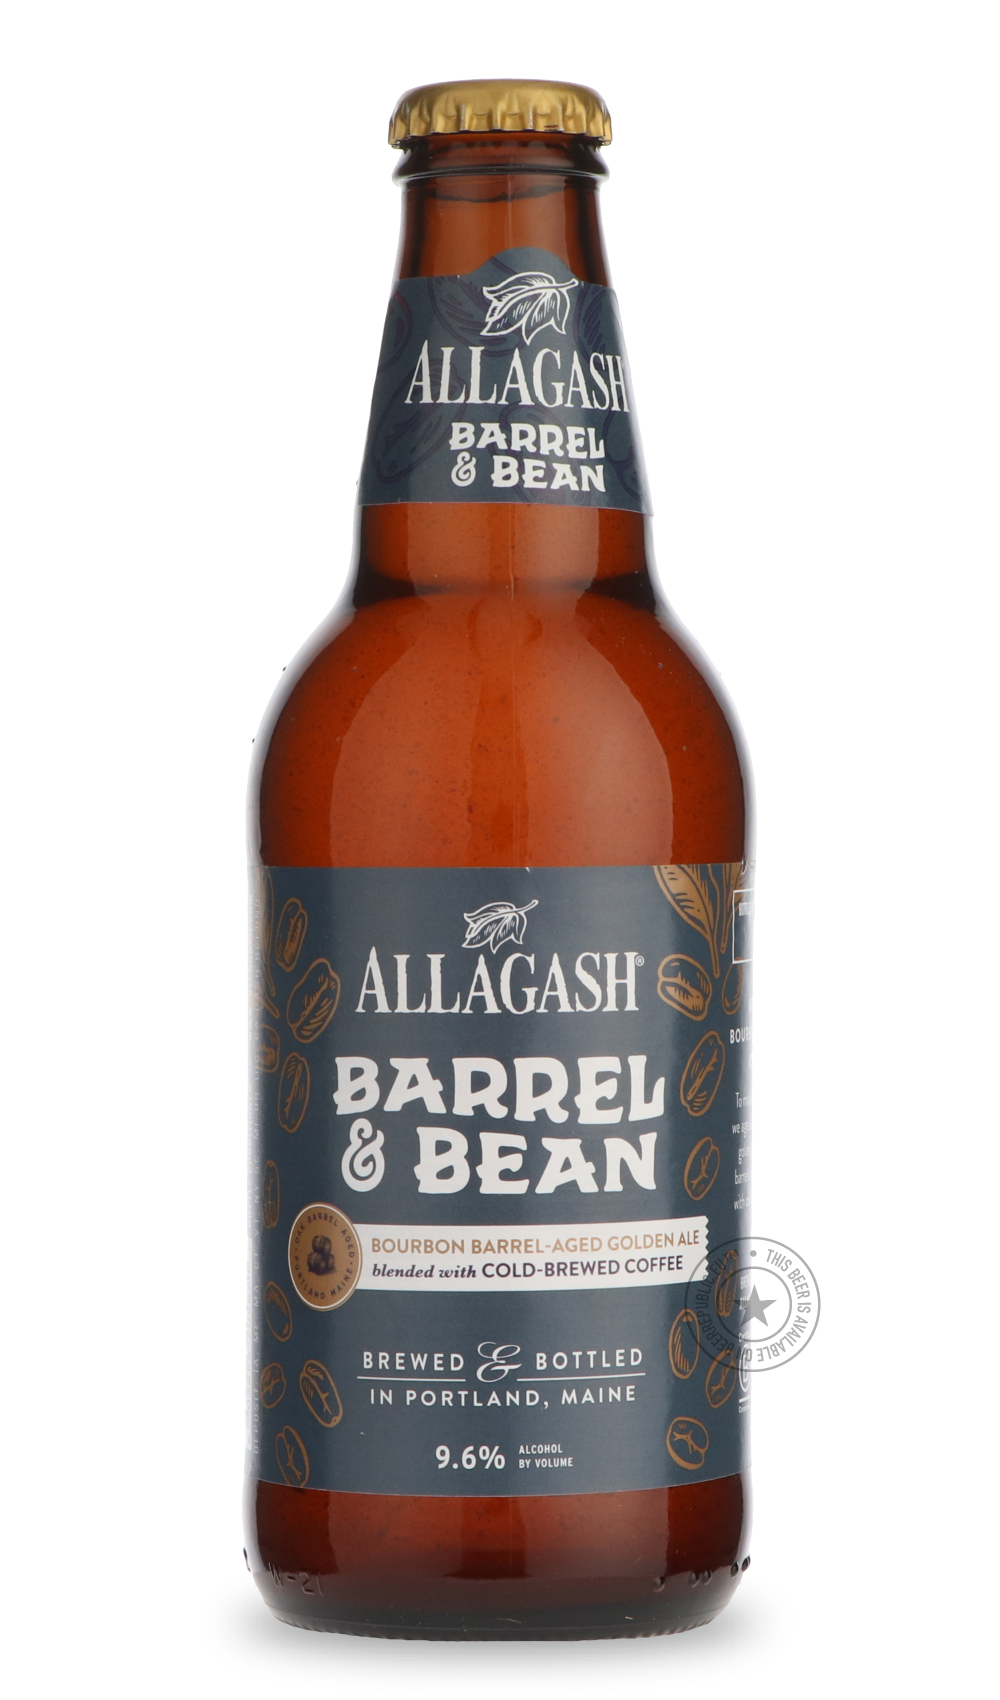 -Allagash- Barrel & Bean-Pale- Only @ Beer Republic - The best online beer store for American & Canadian craft beer - Buy beer online from the USA and Canada - Bier online kopen - Amerikaans bier kopen - Craft beer store - Craft beer kopen - Amerikanisch bier kaufen - Bier online kaufen - Acheter biere online - IPA - Stout - Porter - New England IPA - Hazy IPA - Imperial Stout - Barrel Aged - Barrel Aged Imperial Stout - Brown - Dark beer - Blond - Blonde - Pilsner - Lager - Wheat - Weizen - Amber - Barley 